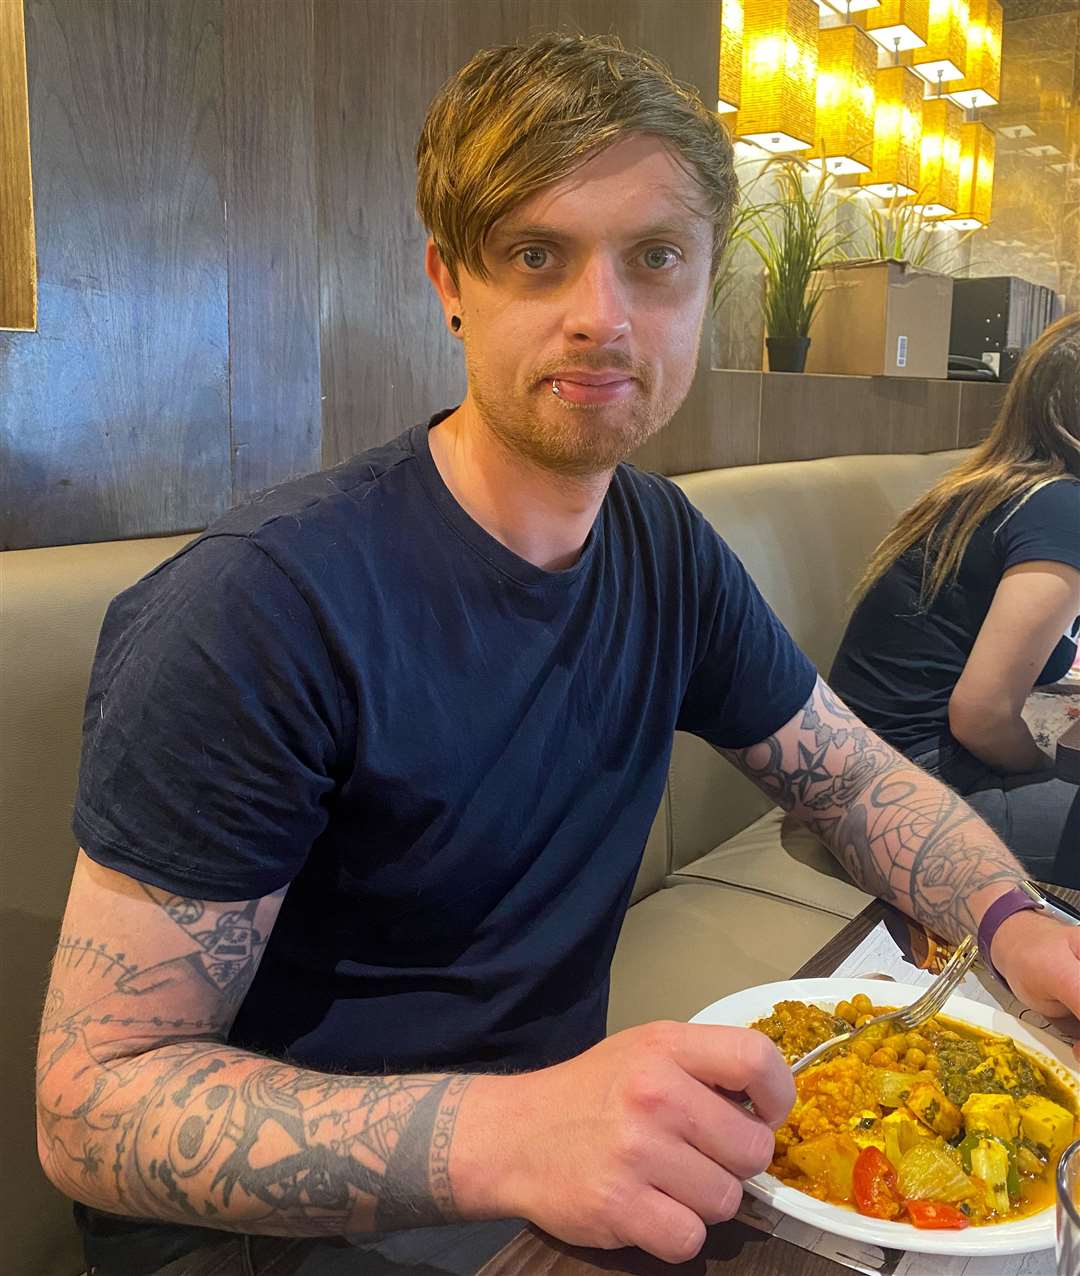 My partner happily sampled several of the restaurant's spicy curries. Picture: Sam Lawrie